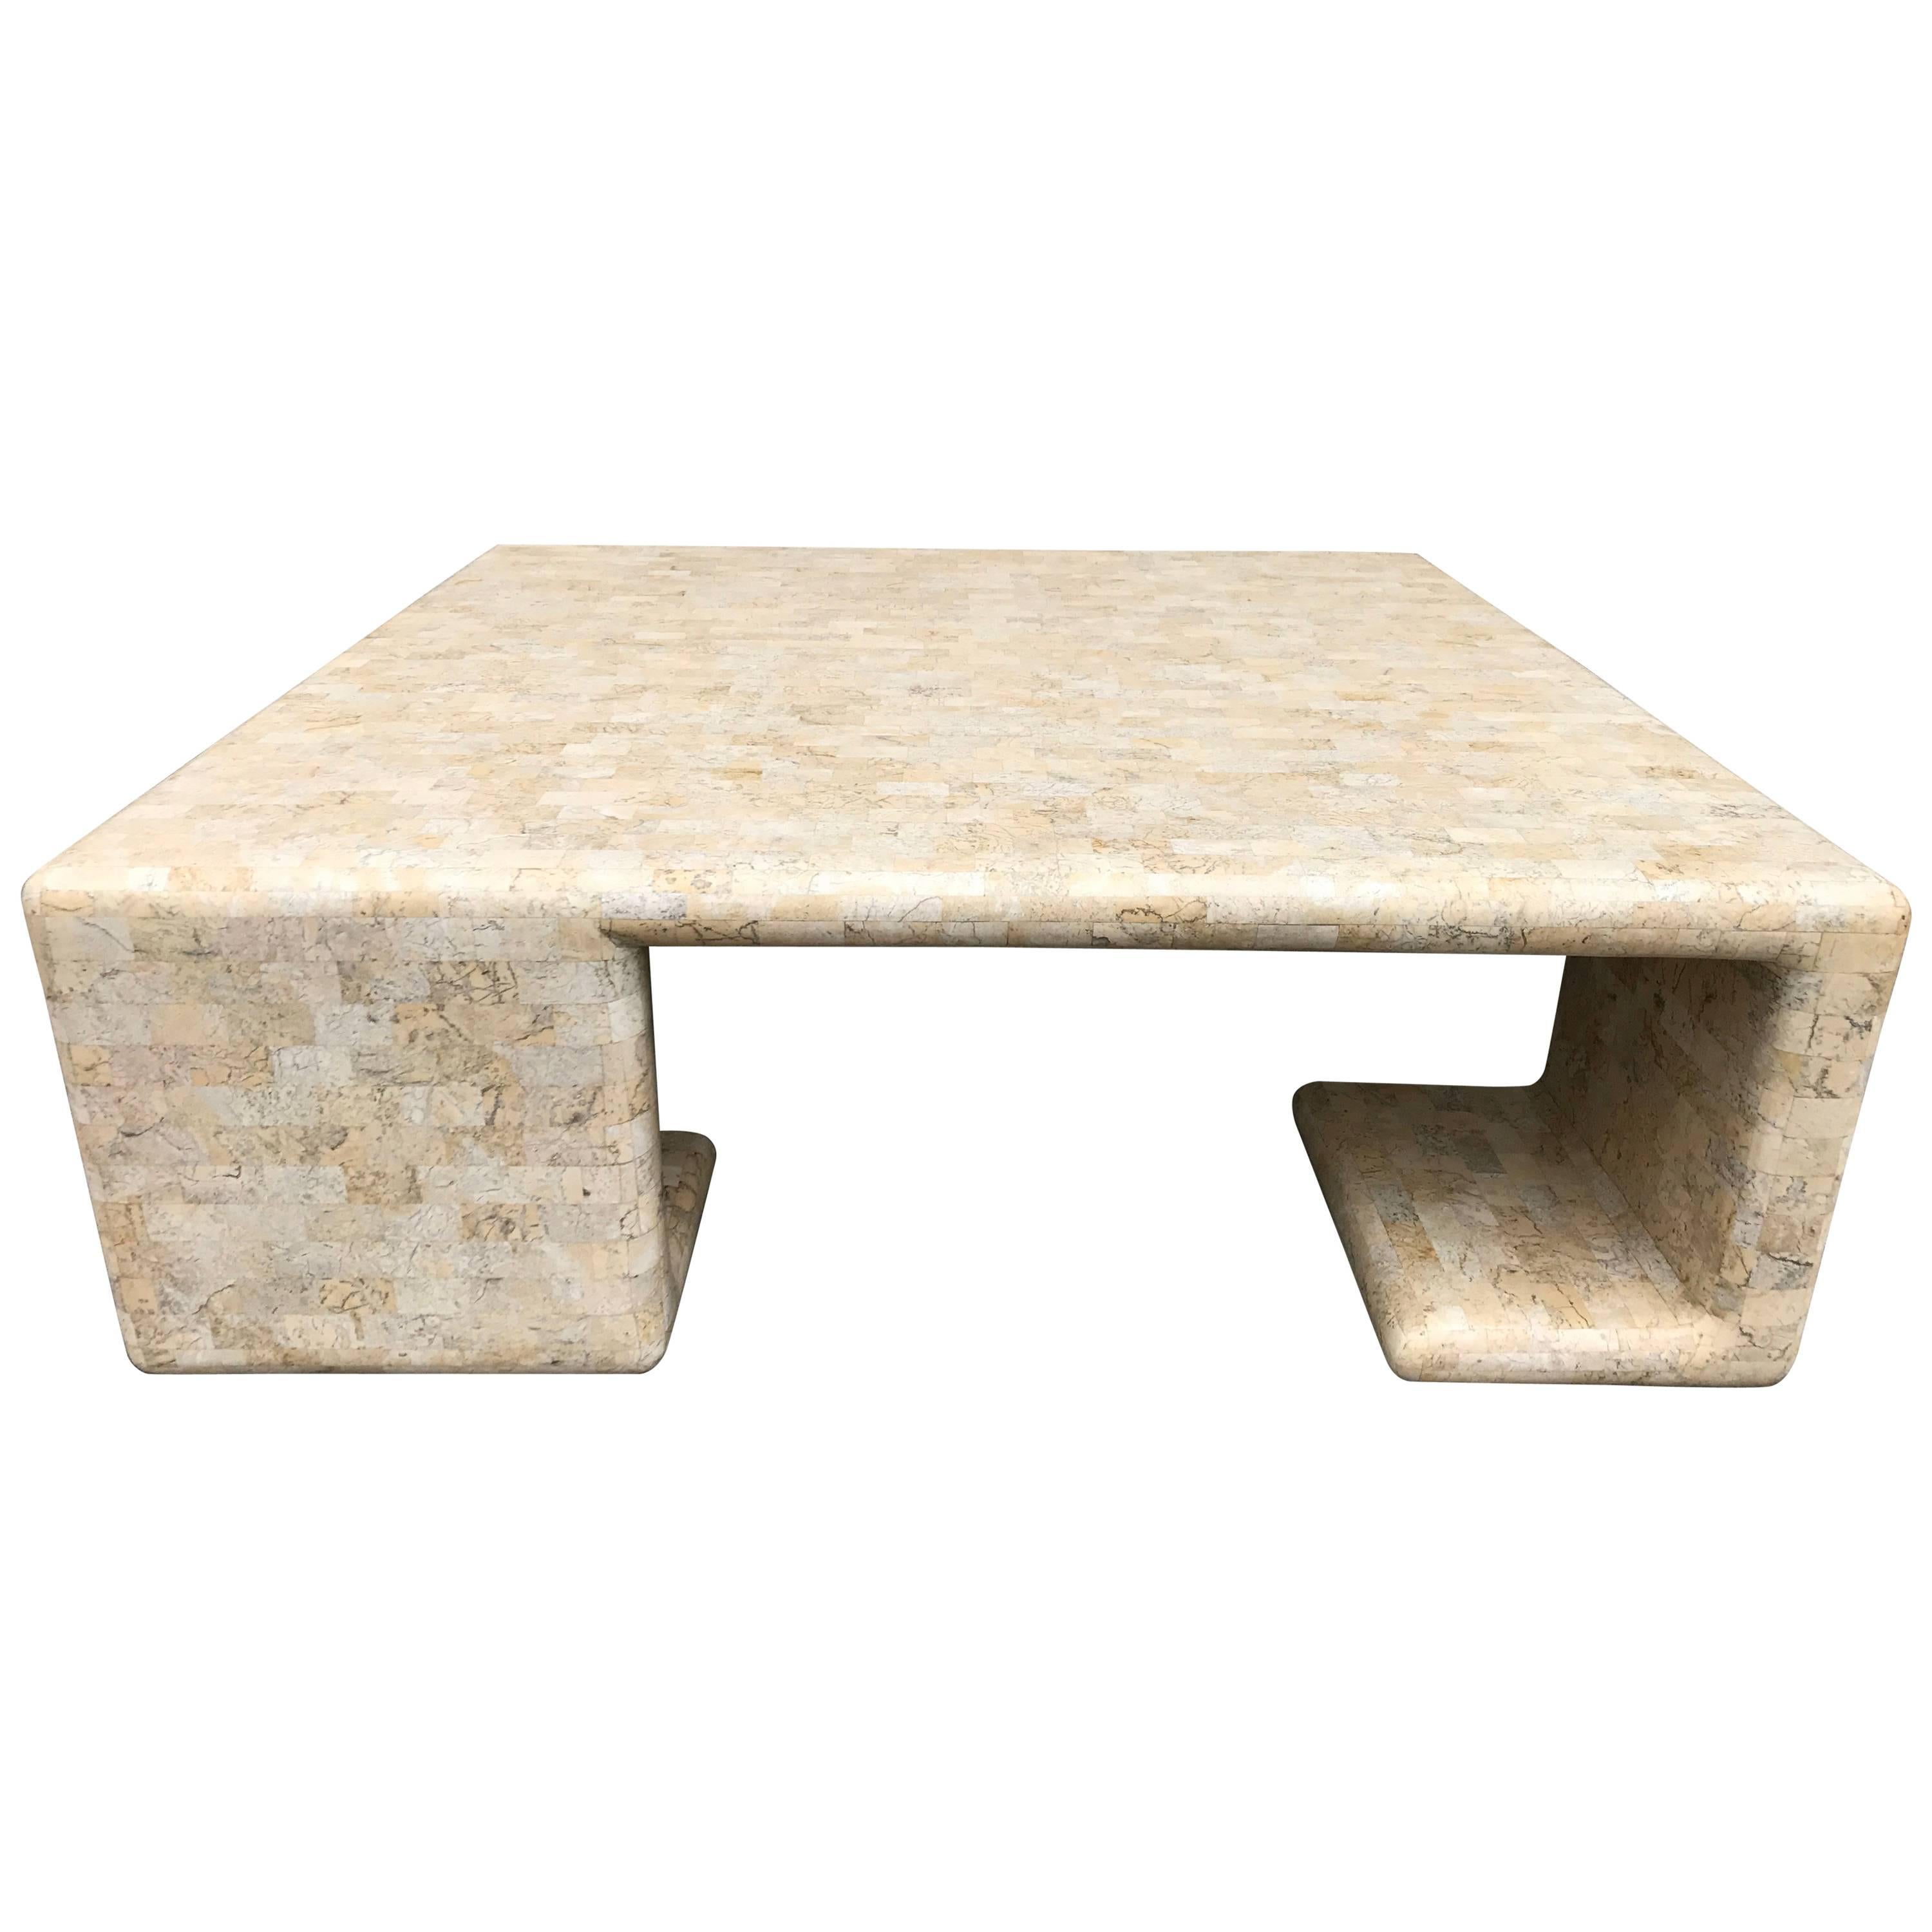 Impressive Tessellated Fossil Stone Tiled Coffee Table by Maitland-Smith